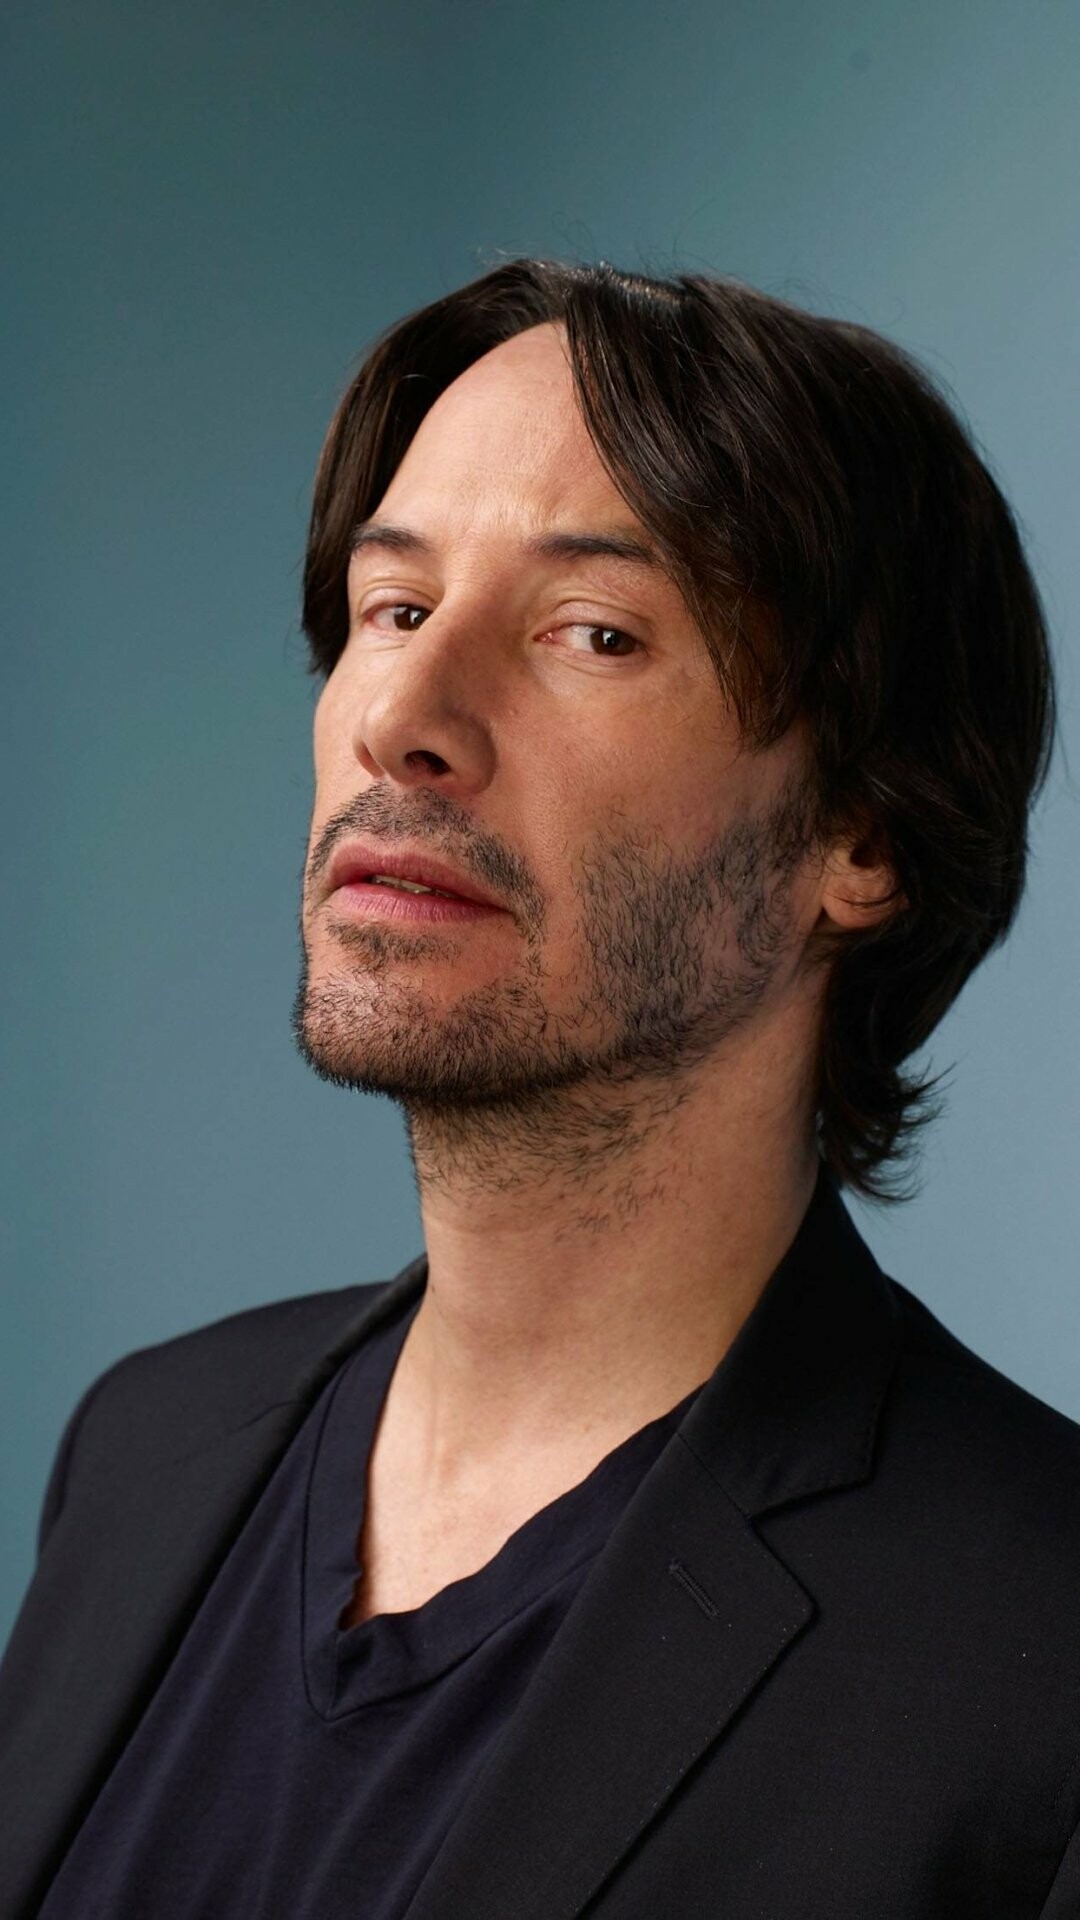 Keanu Reeves: A movie star, Comedy Bill and Ted's Excellent Adventure, 1989, Celebrity. 1080x1920 Full HD Background.